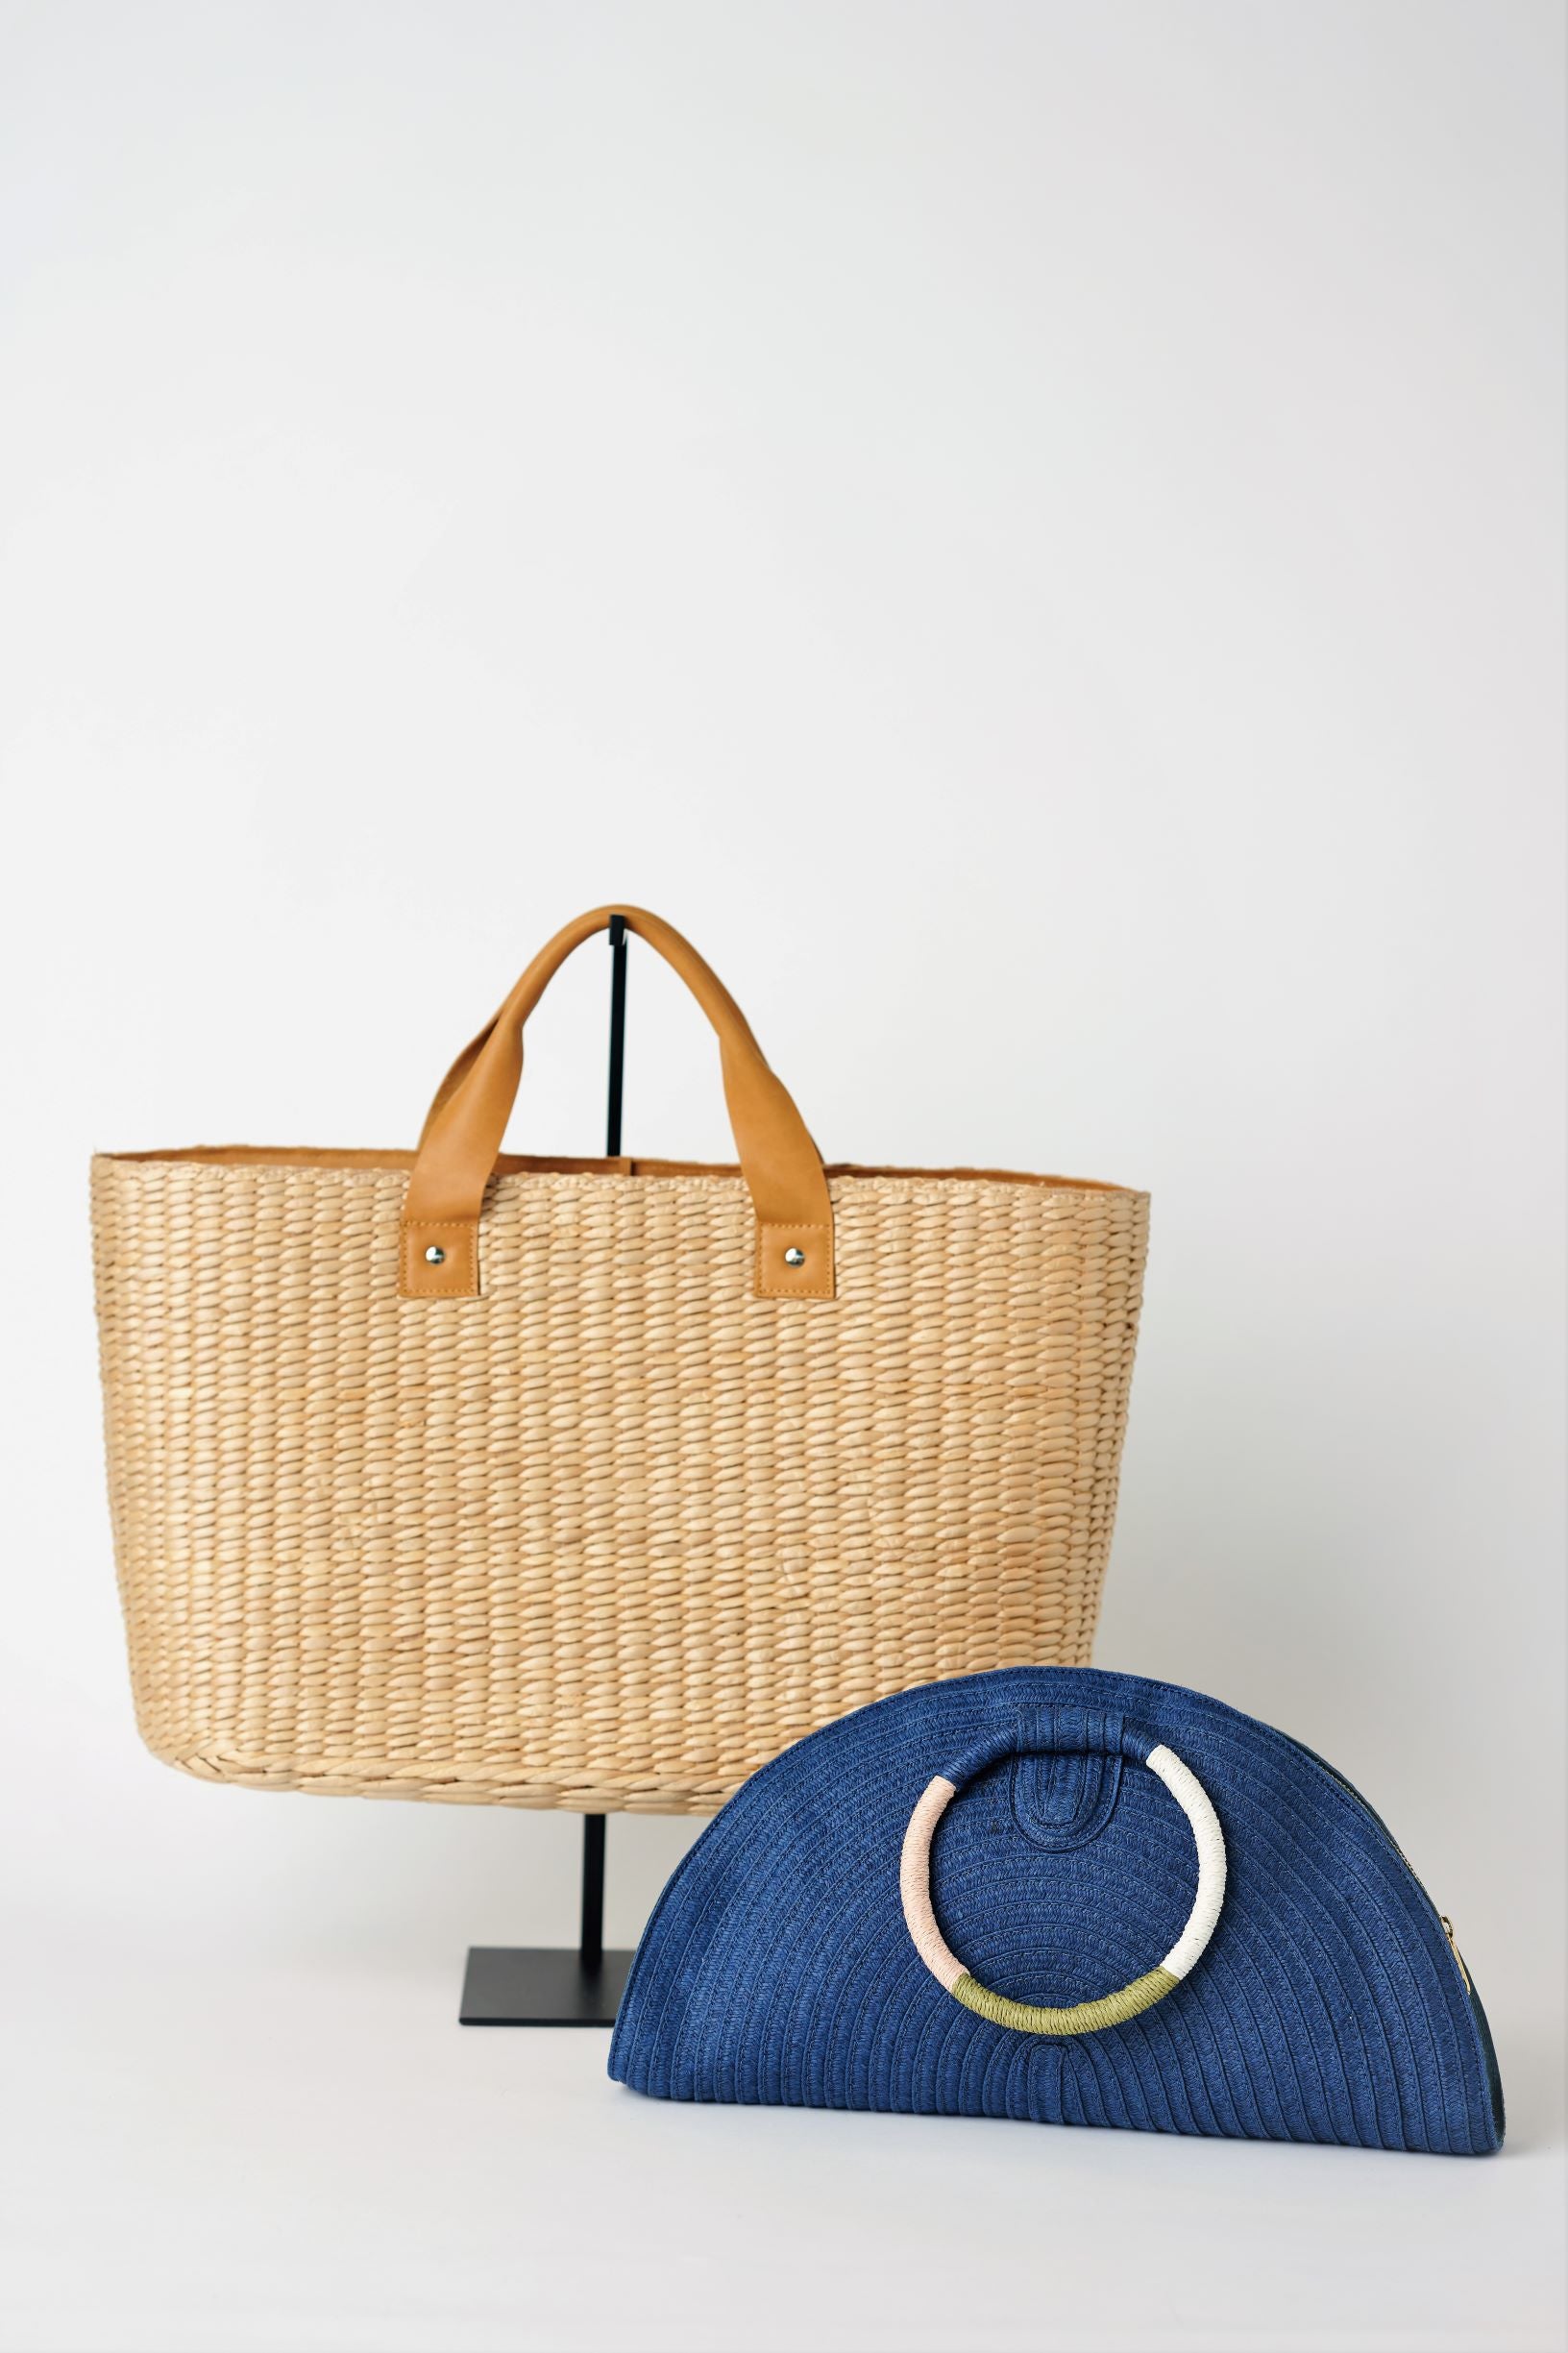 Collection of Anya & Niki Westmont straw bag with leather handles and Posey navy straw half moon clutch.